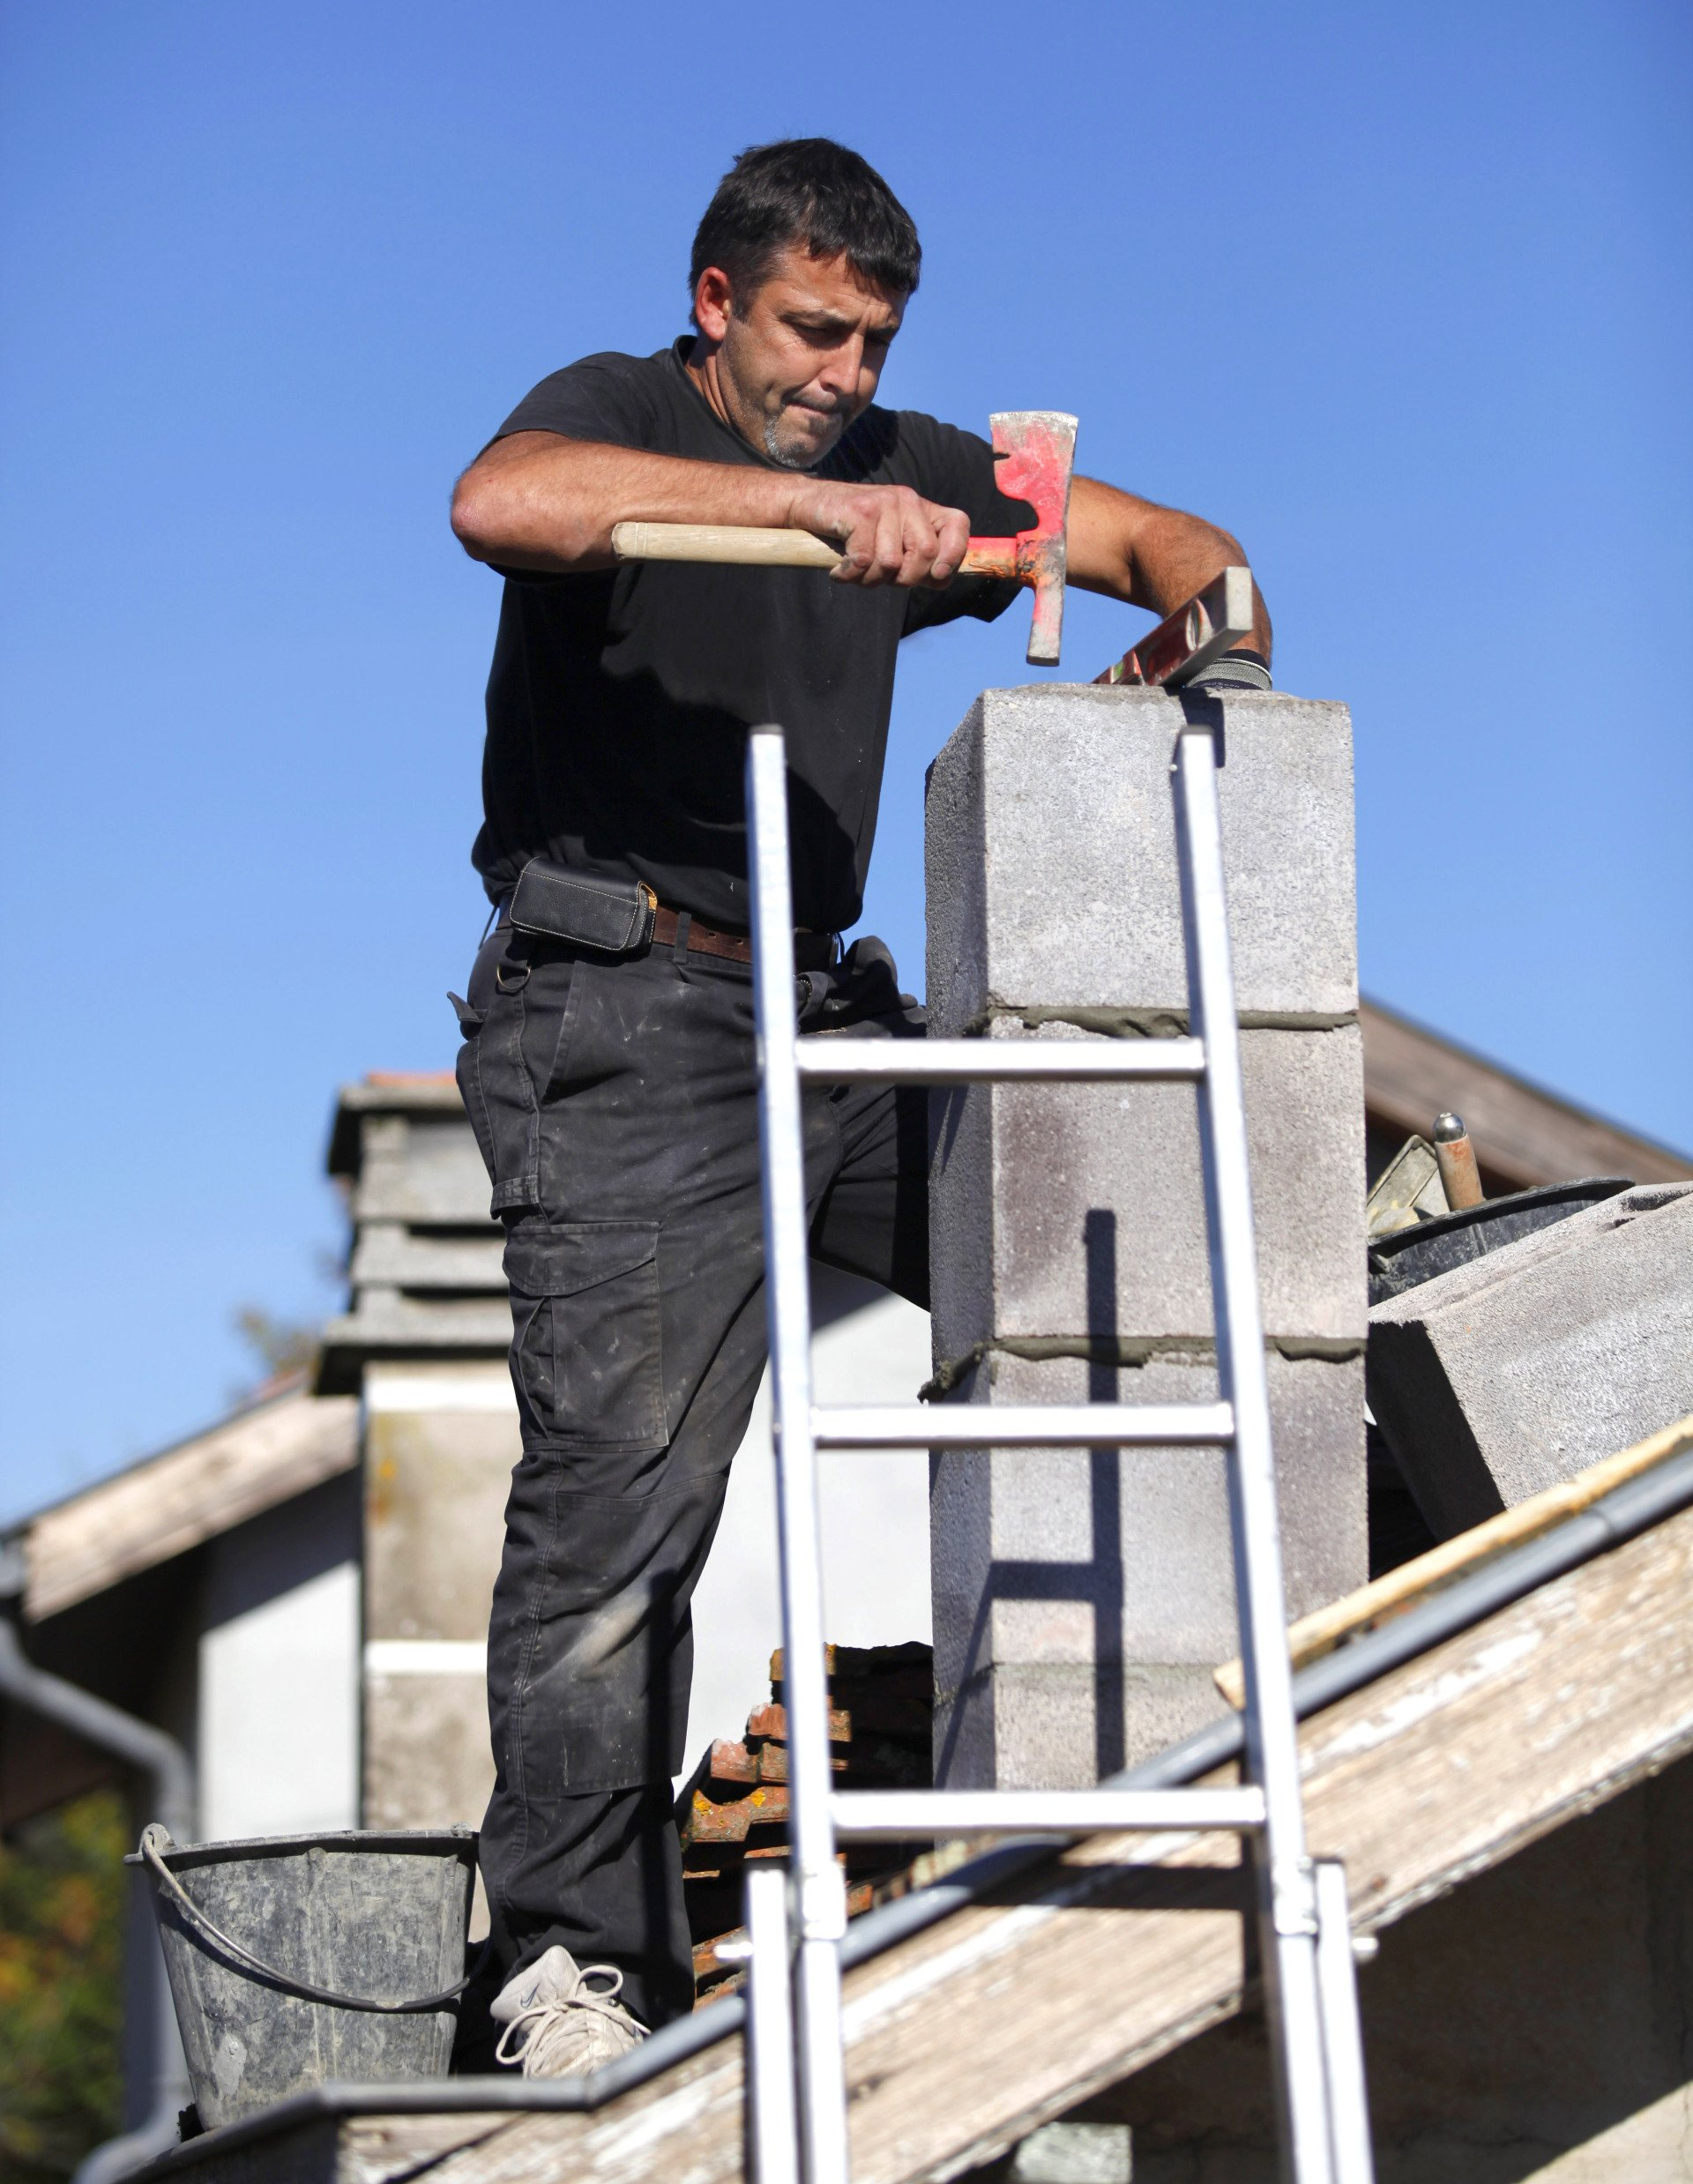 chimney construction and repair in worcester massachusetts